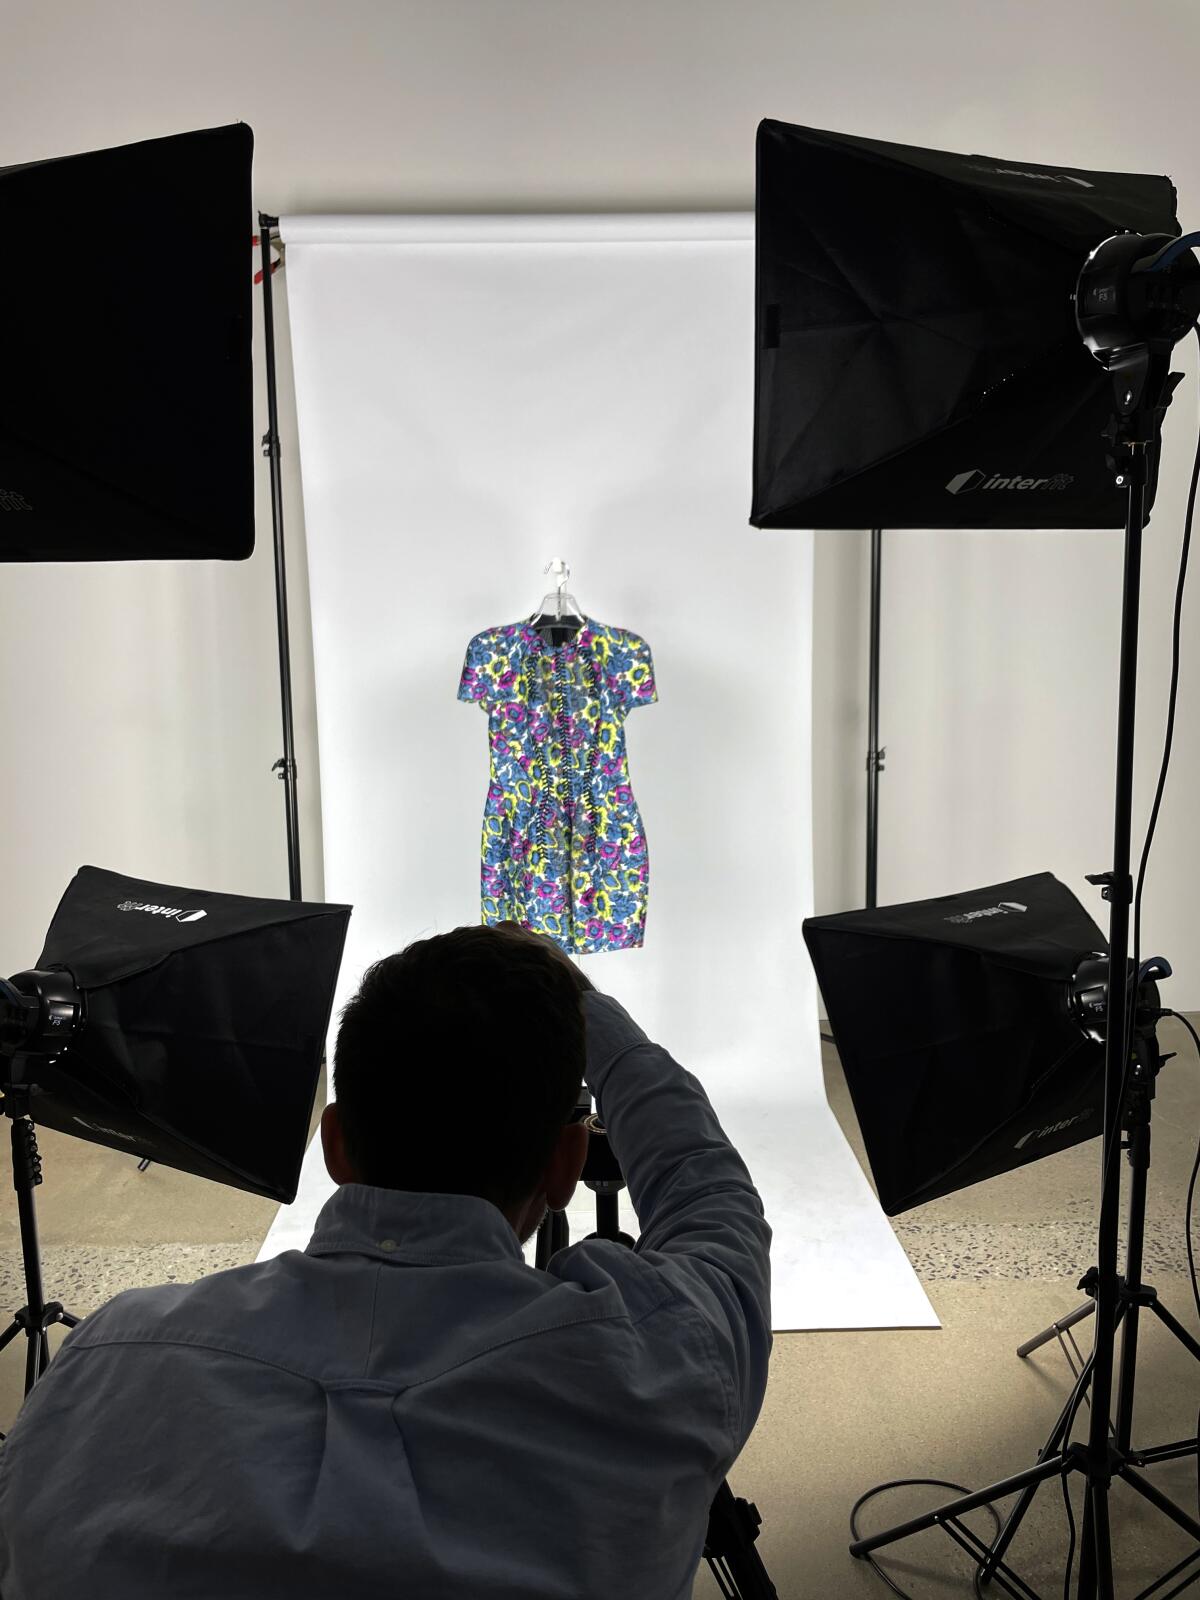 A dress hung against a blank backdrop is photographed.